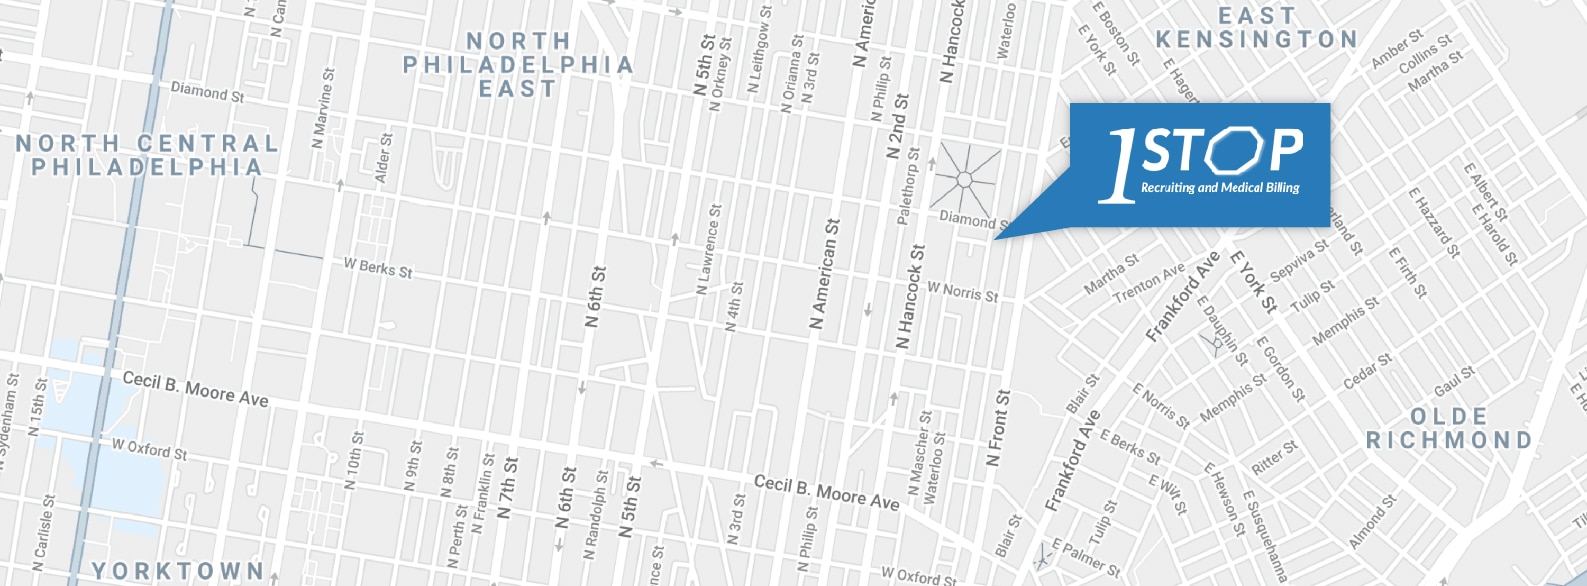 One Stop Recruiting Map Location In Philadelphia